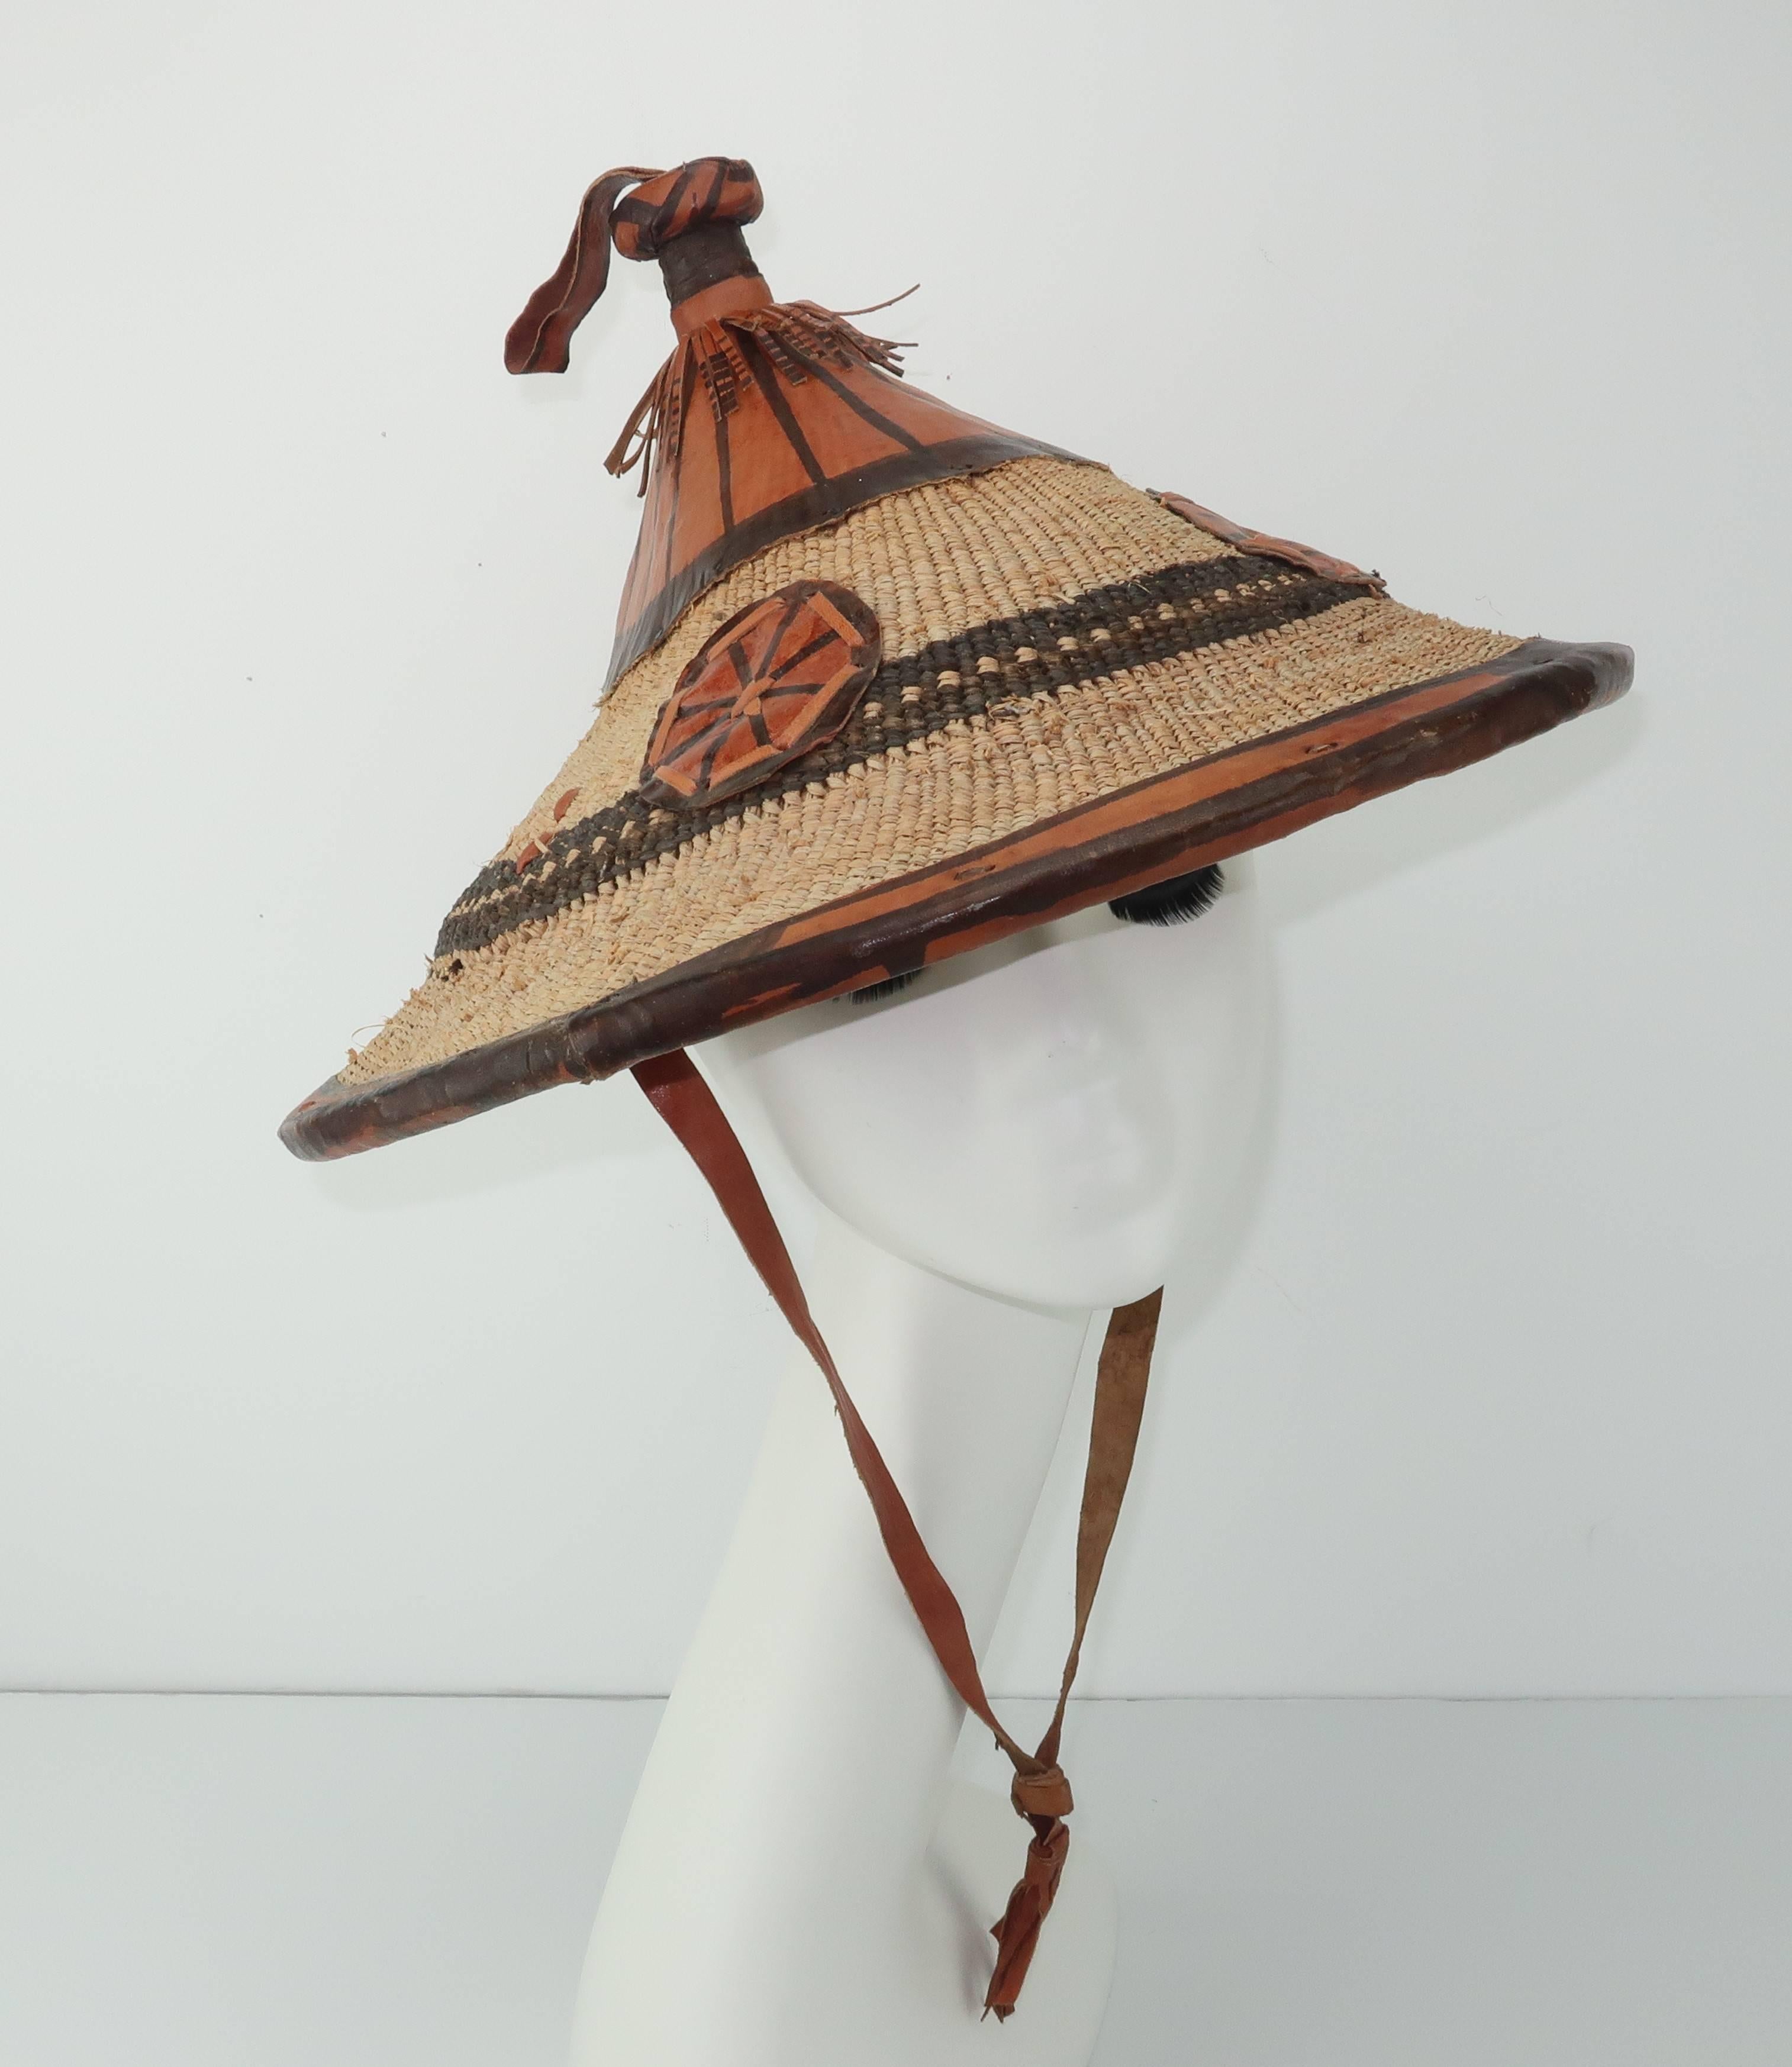 Get the look of a world traveler with this vintage African hat hand made from a tight straw weave with painted leather decoration.  The pagoda shape provides both shade and a fun silhouette to pair with everything from beach wear to a tropical